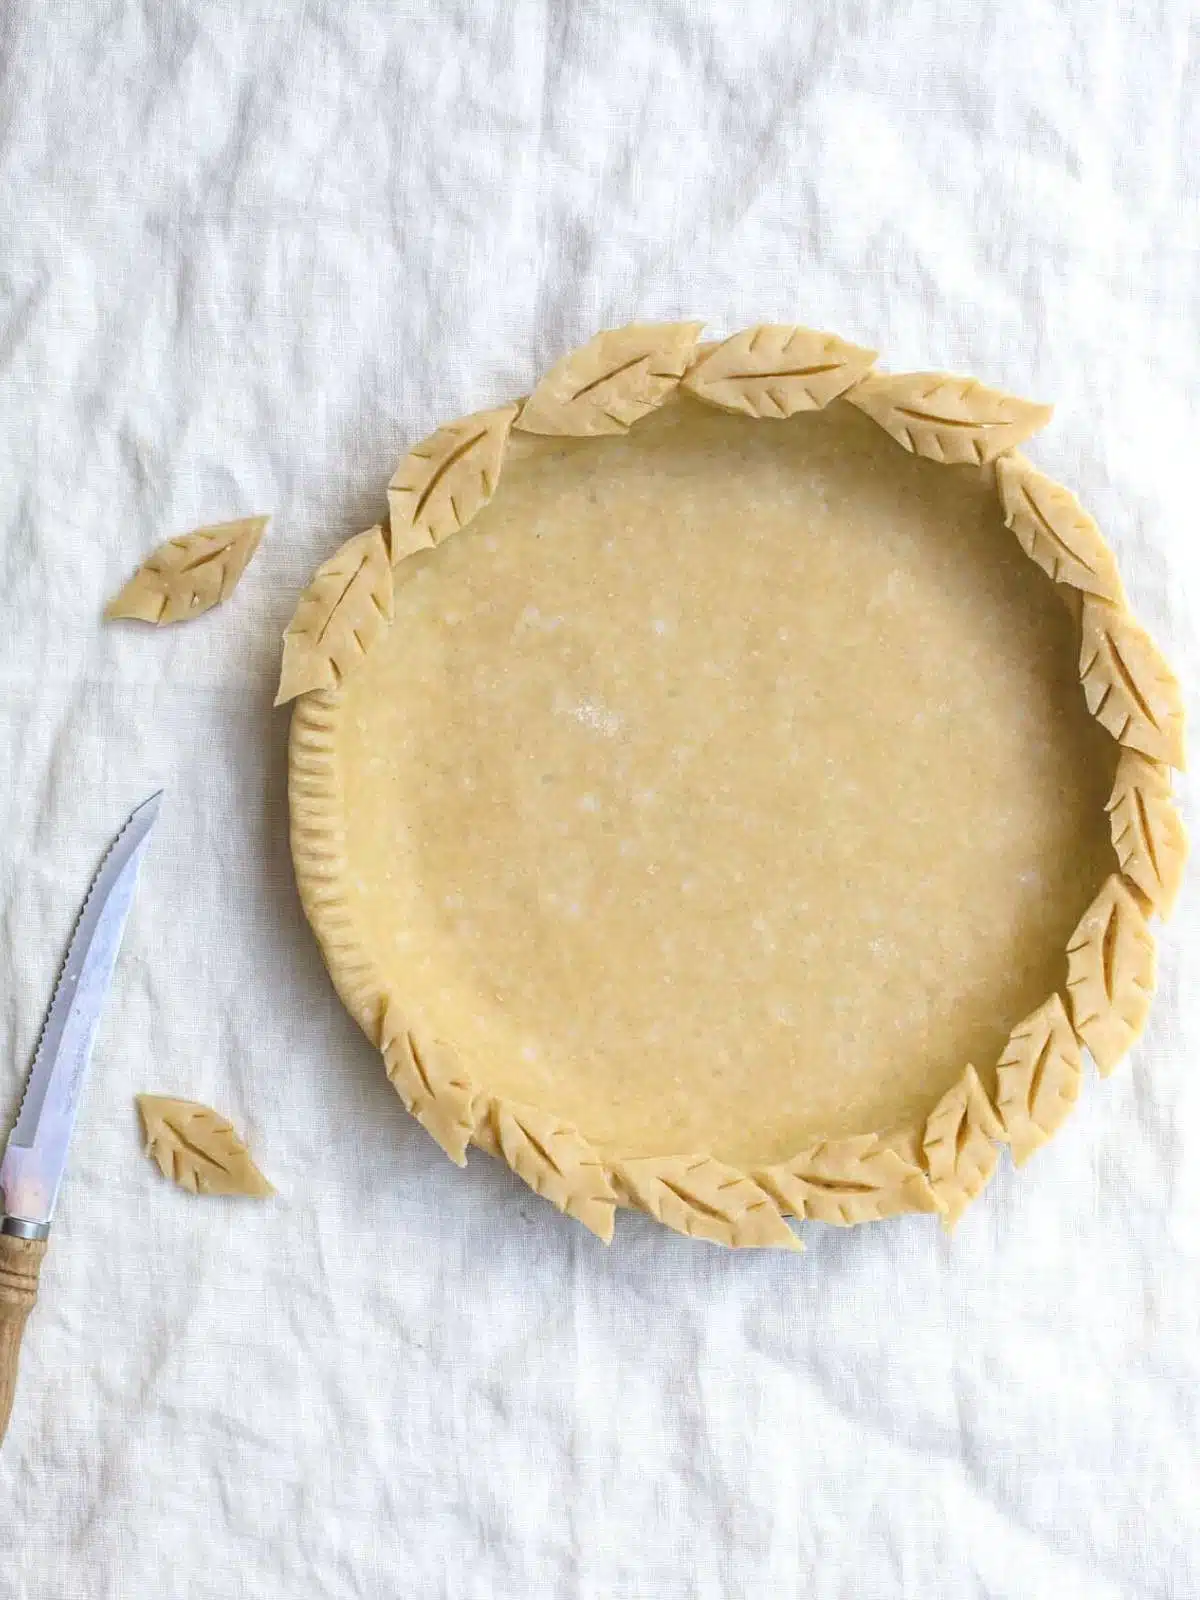 Finished pie crust pastry in a pie tin with pastry leaves.